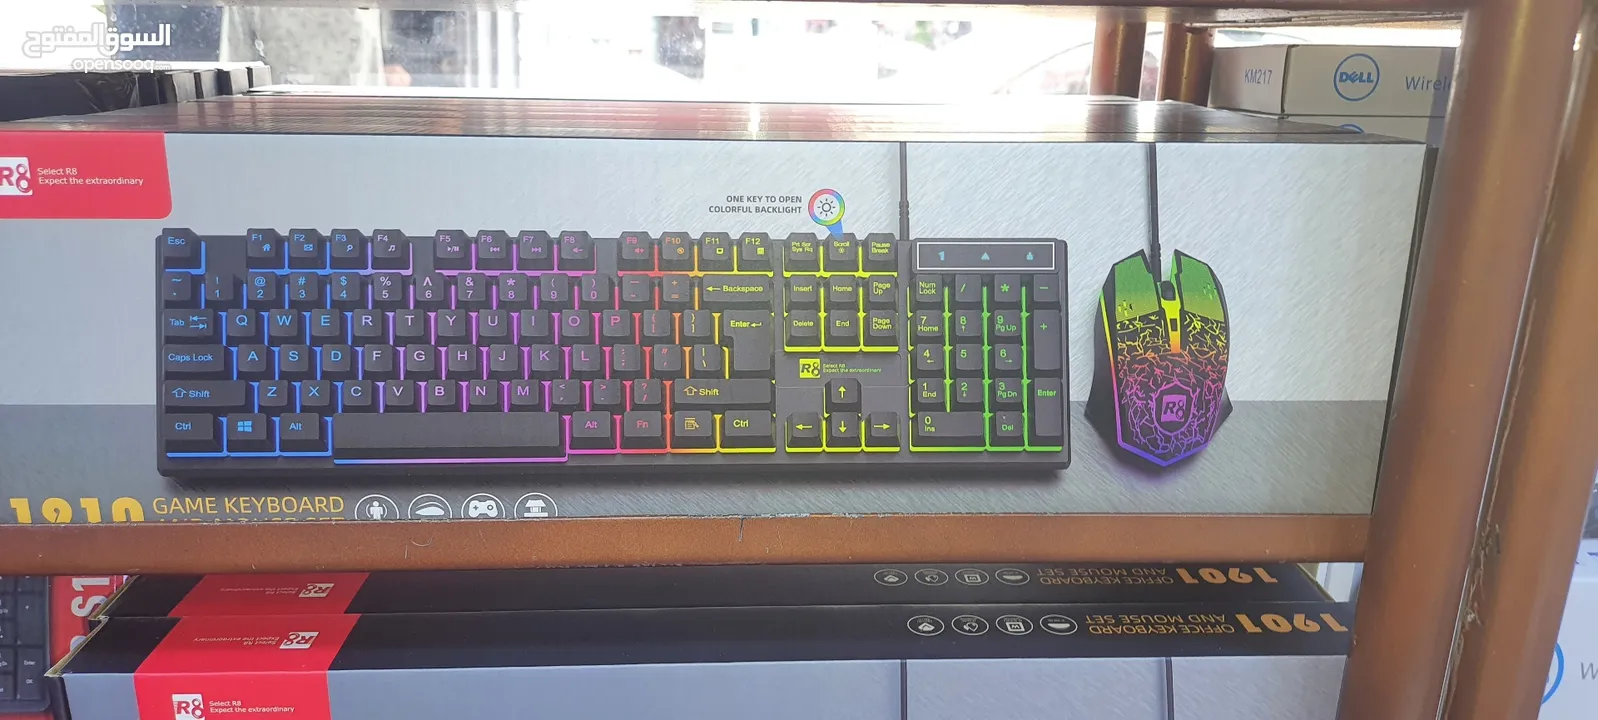 R8 Game Keyboard + Mouse + Led Color